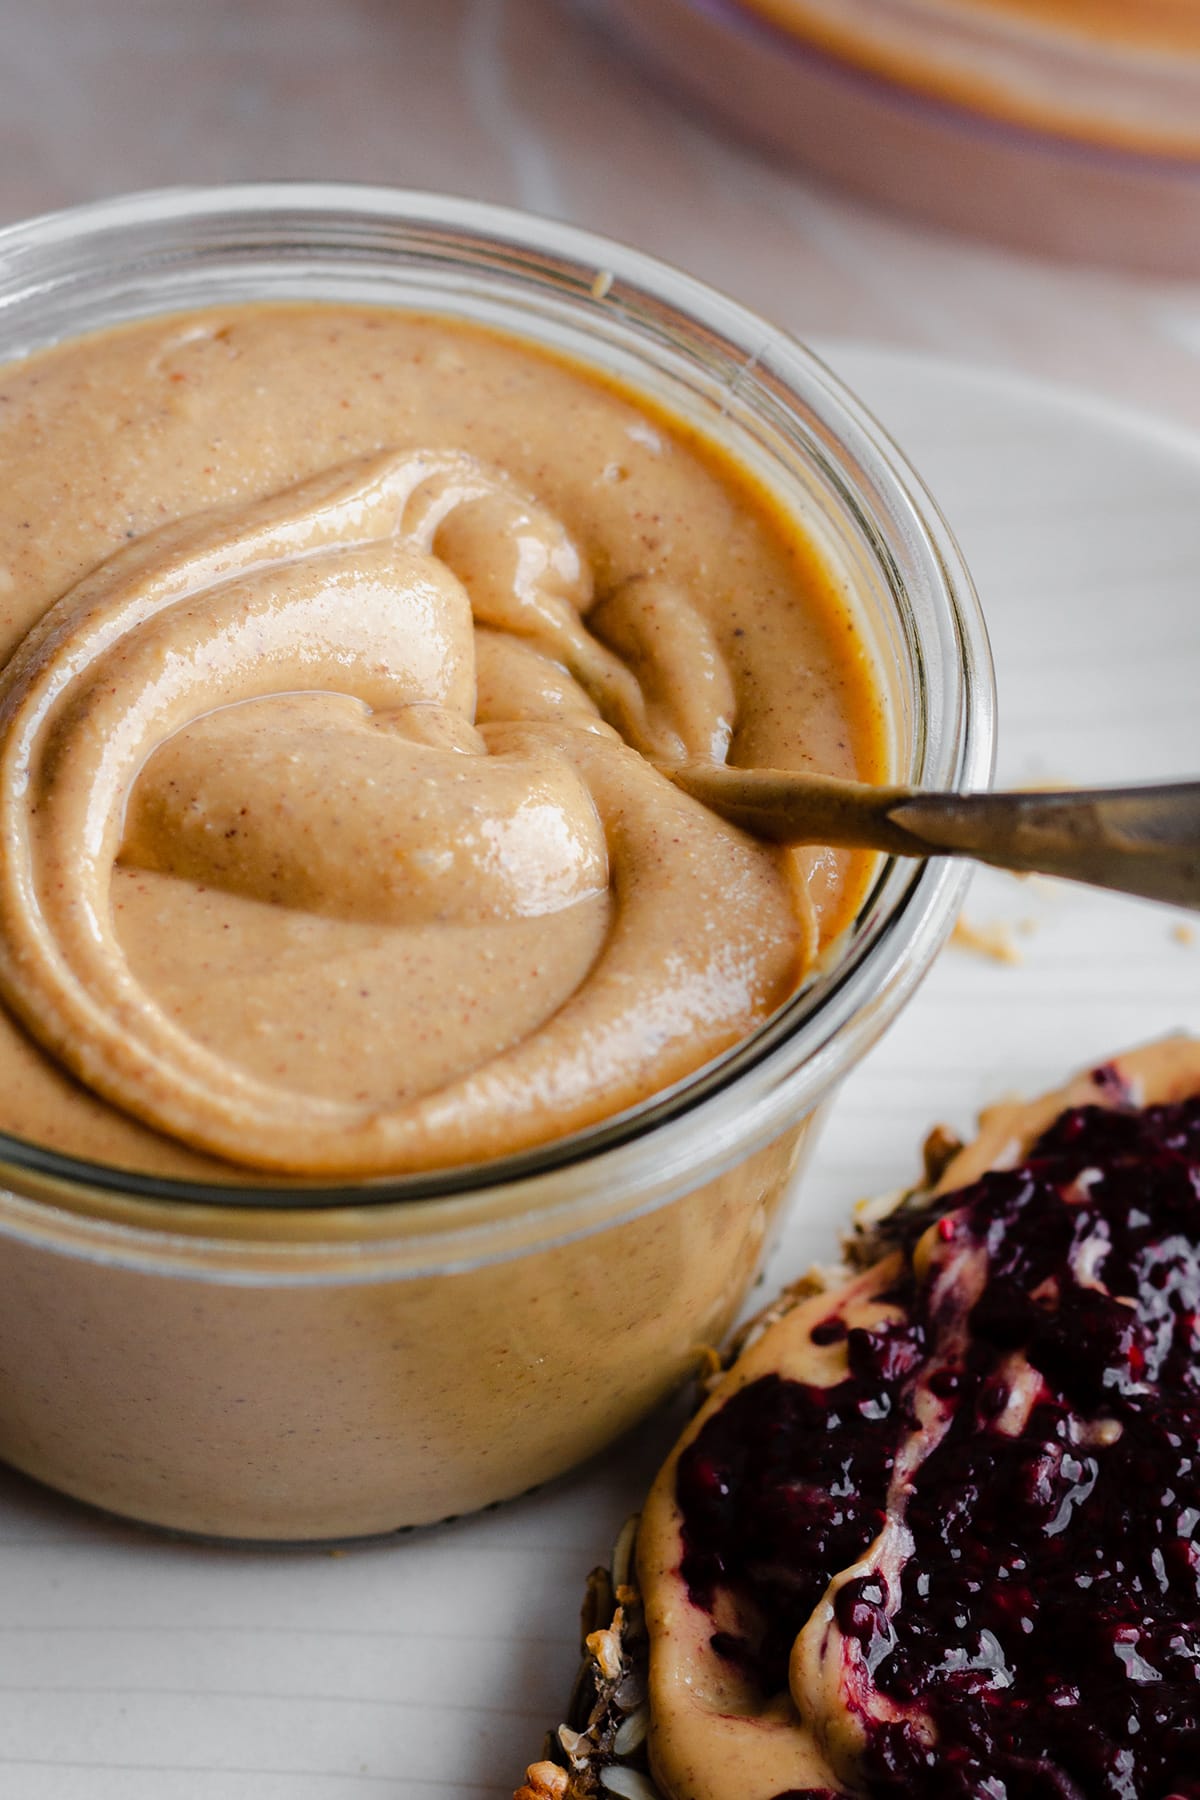 Wild Jungle Peanut Butter in a glass jar on a white plate. With a spoon in the jar.